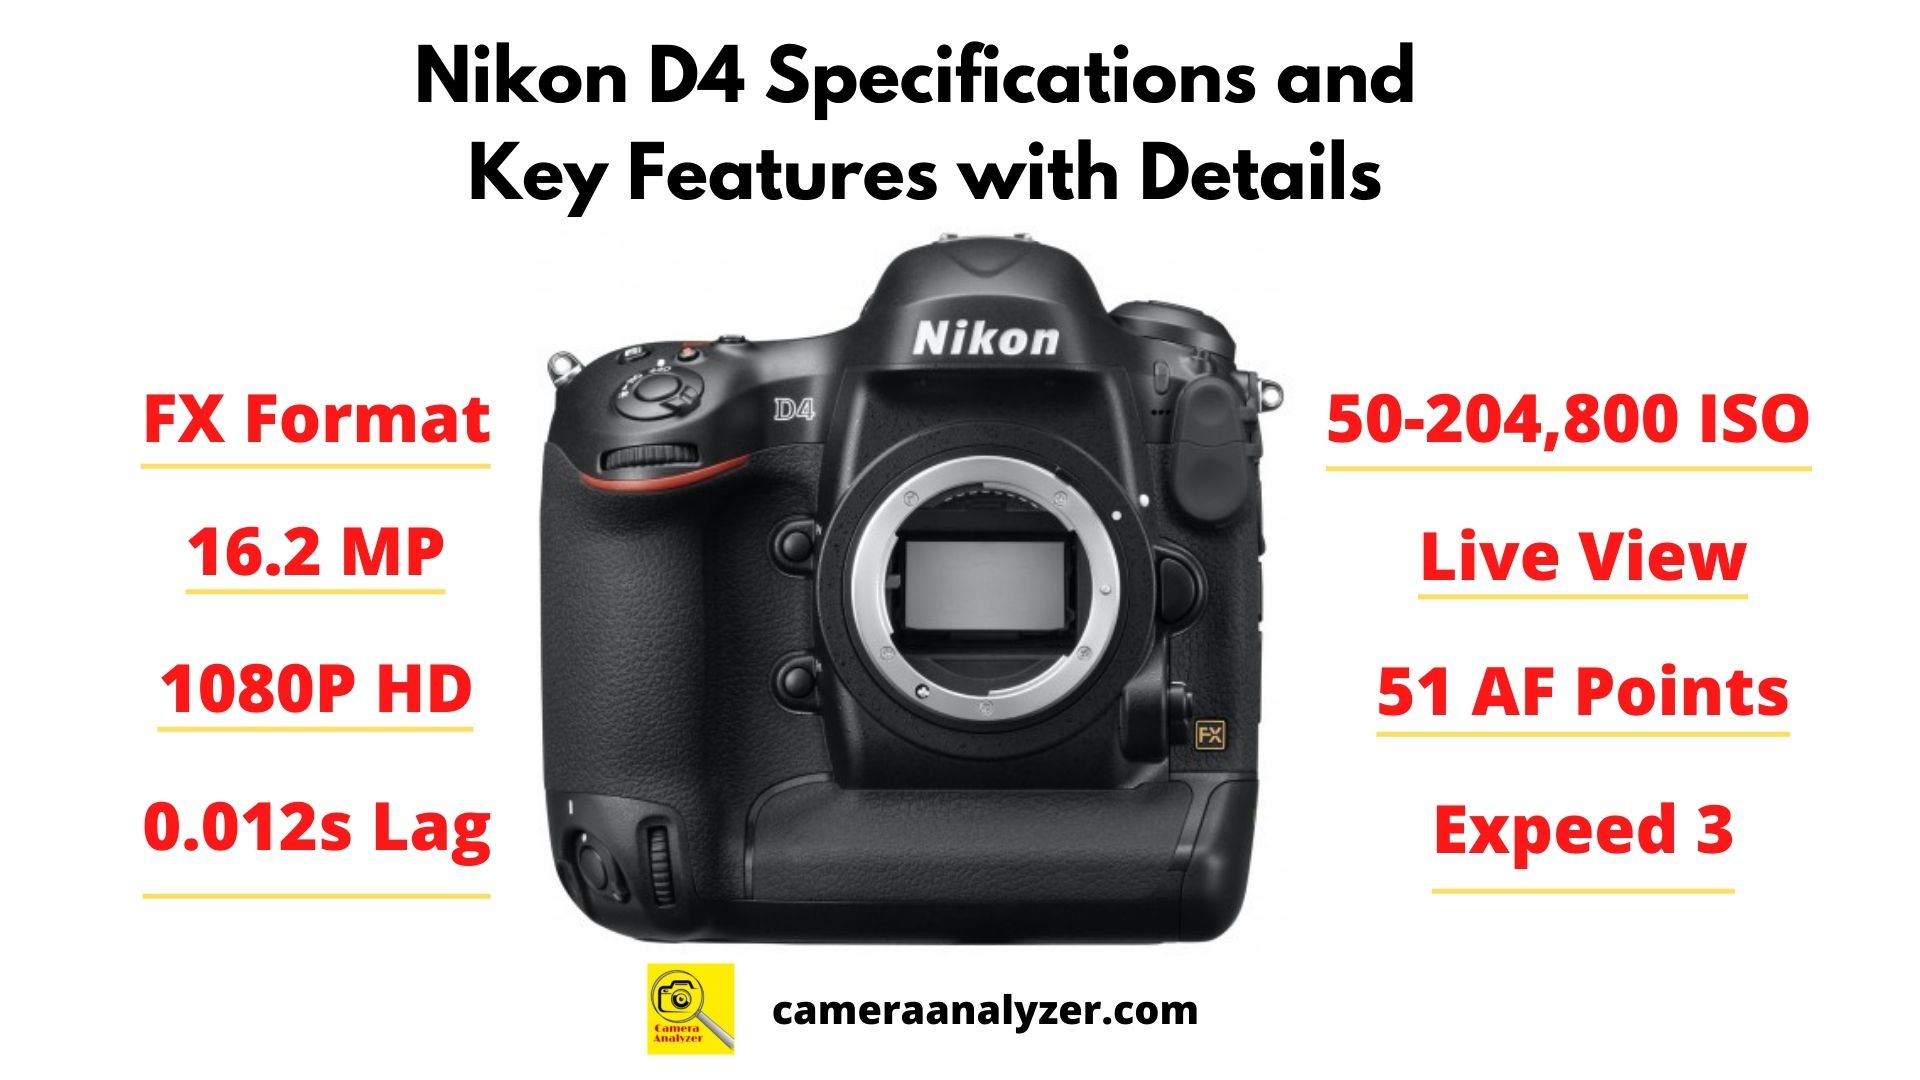 Nikon D4 Specifications and Key Features